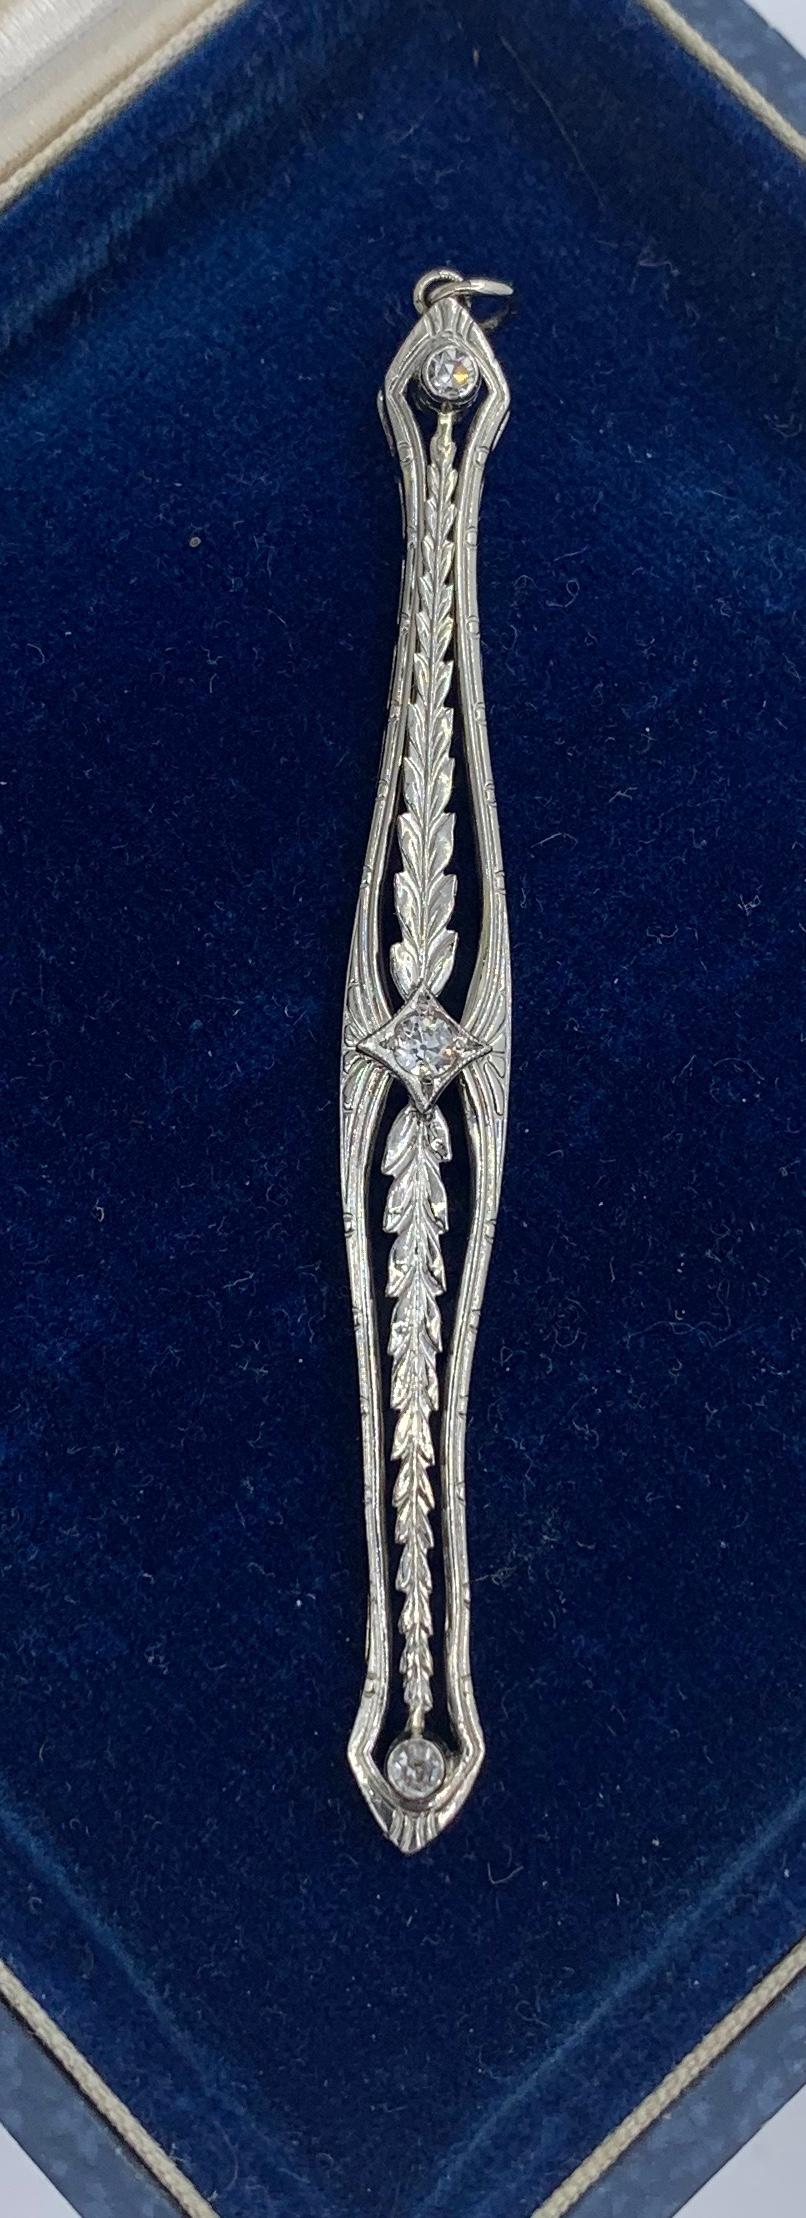 A very special antique Edwardian, Art Deco lavaliere pendant with three Old Mine Cut Diamonds in an open work leaf motif filigree design in 14 Karat White Gold.  In the center is a sparkling white Old Mine Cut Diamond of approximately 10 points. 